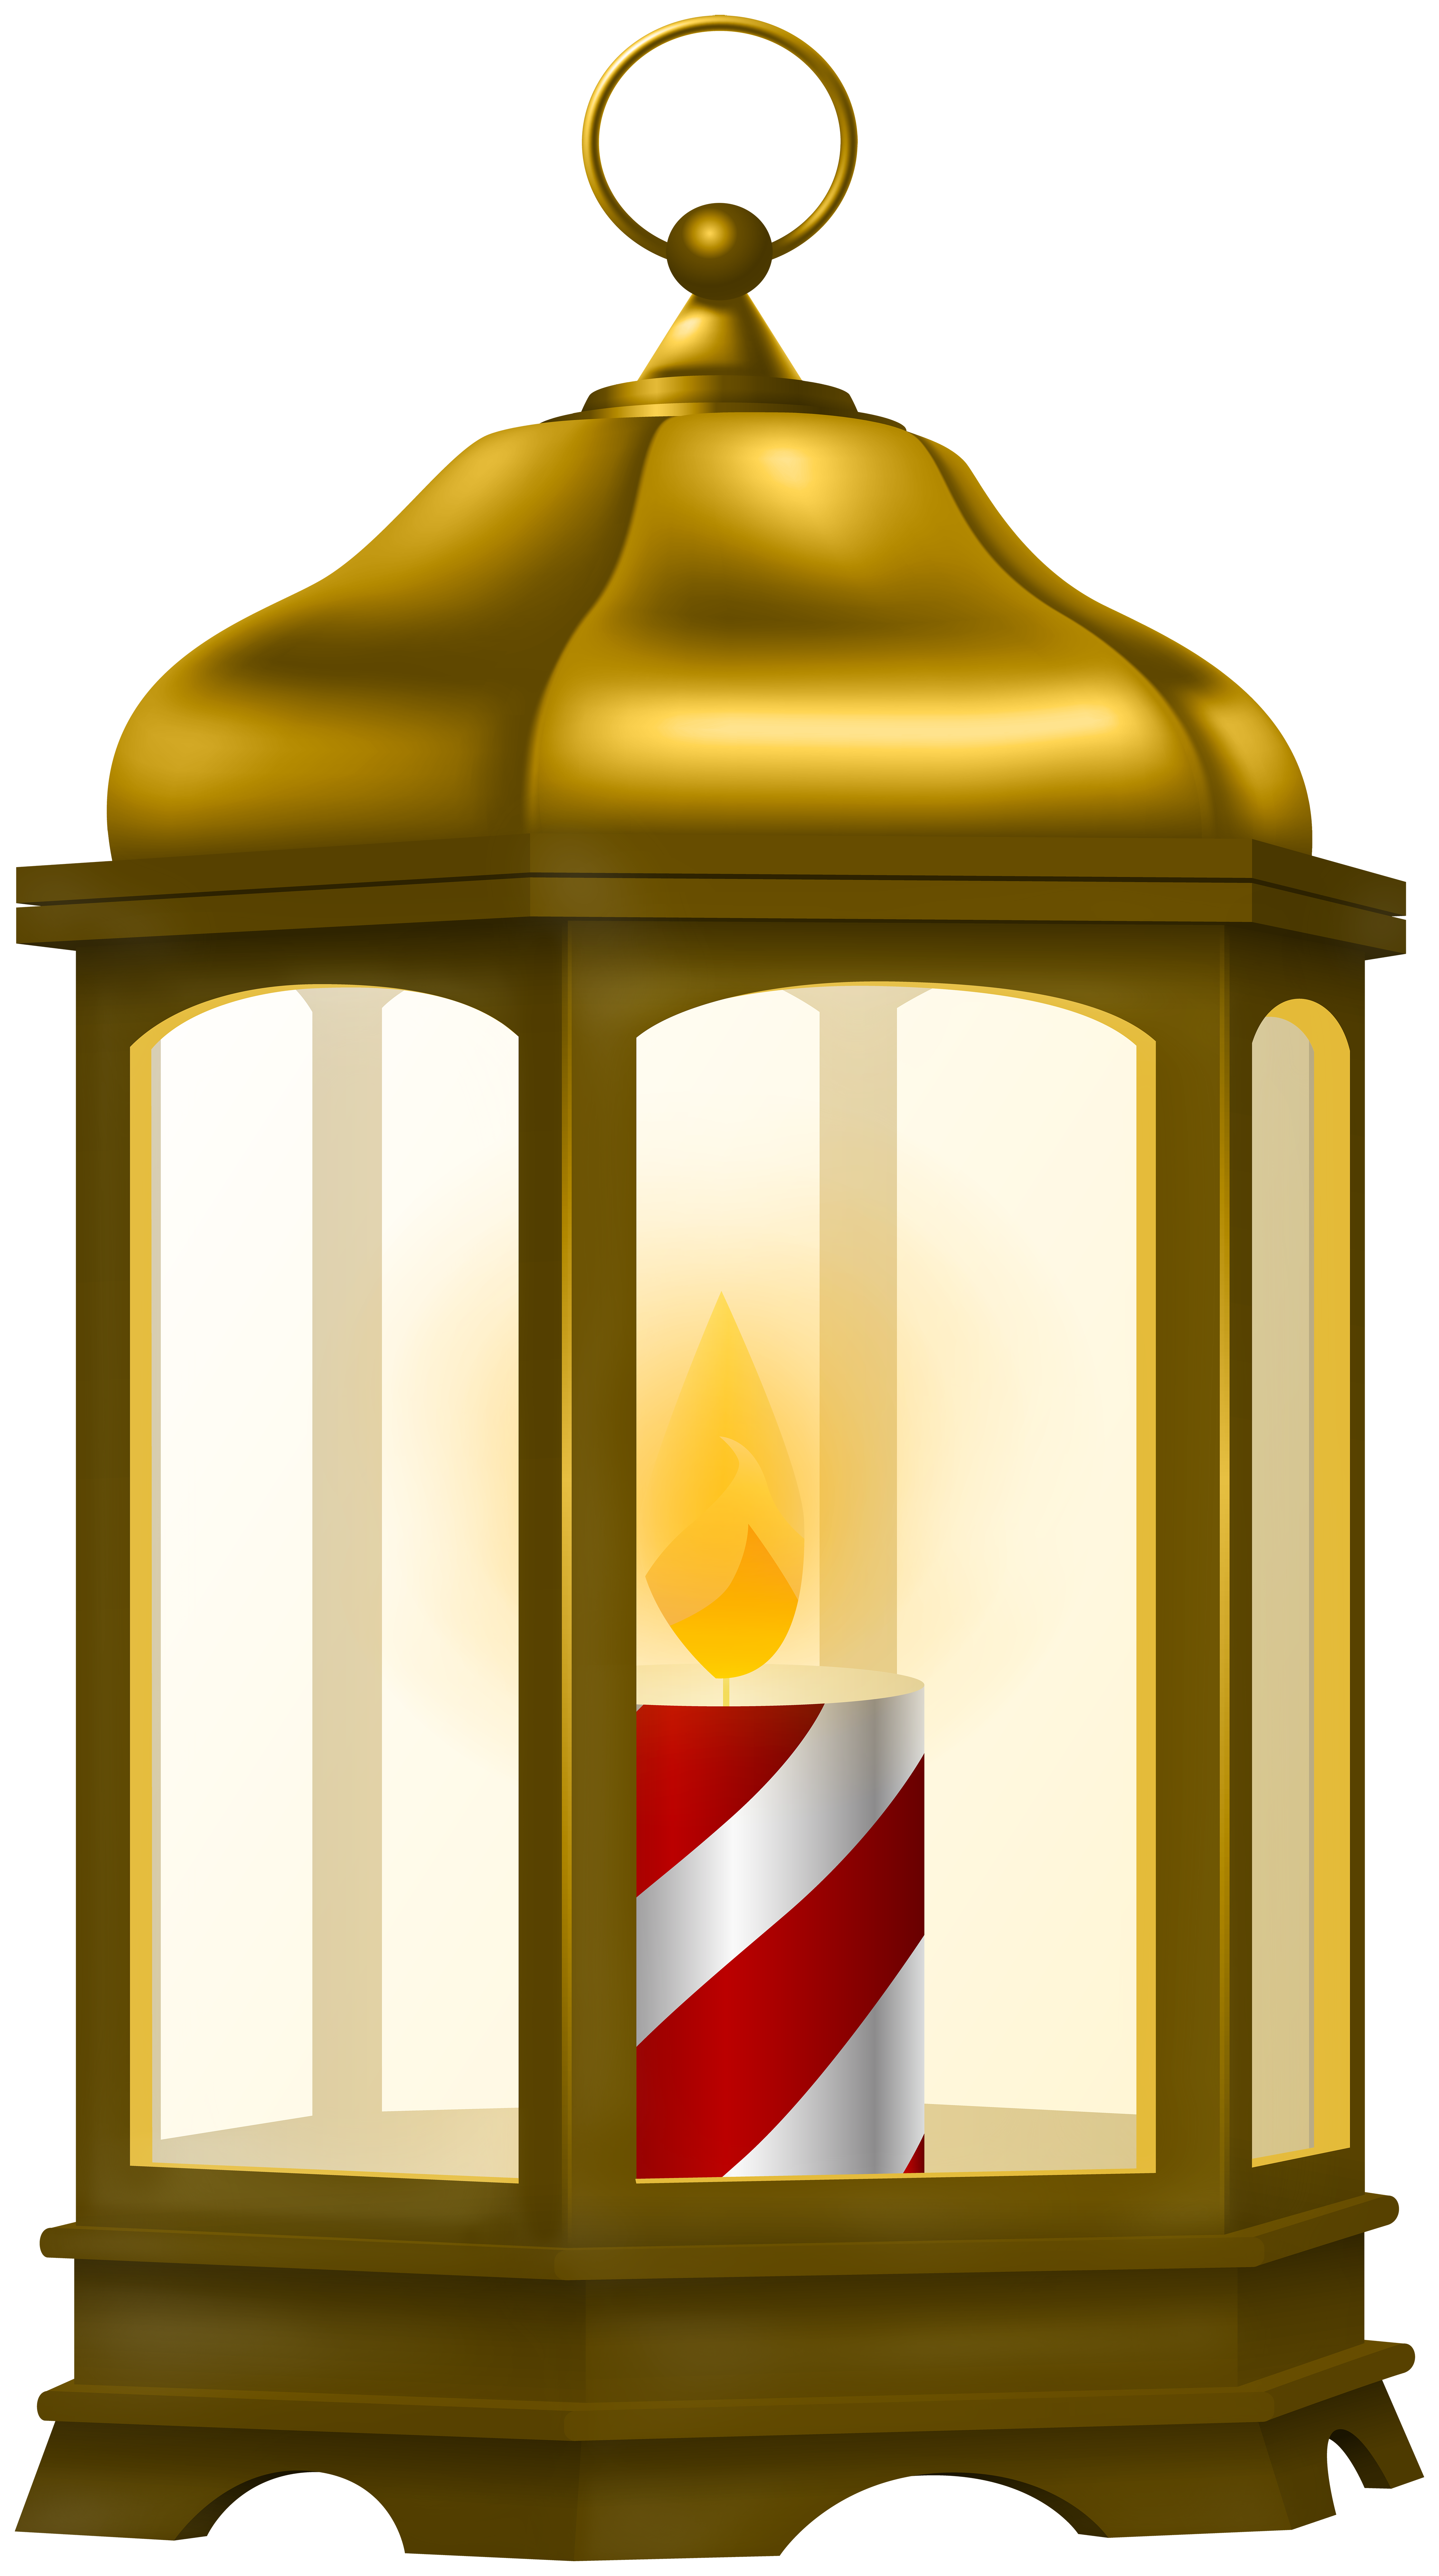 candle lantern clipart